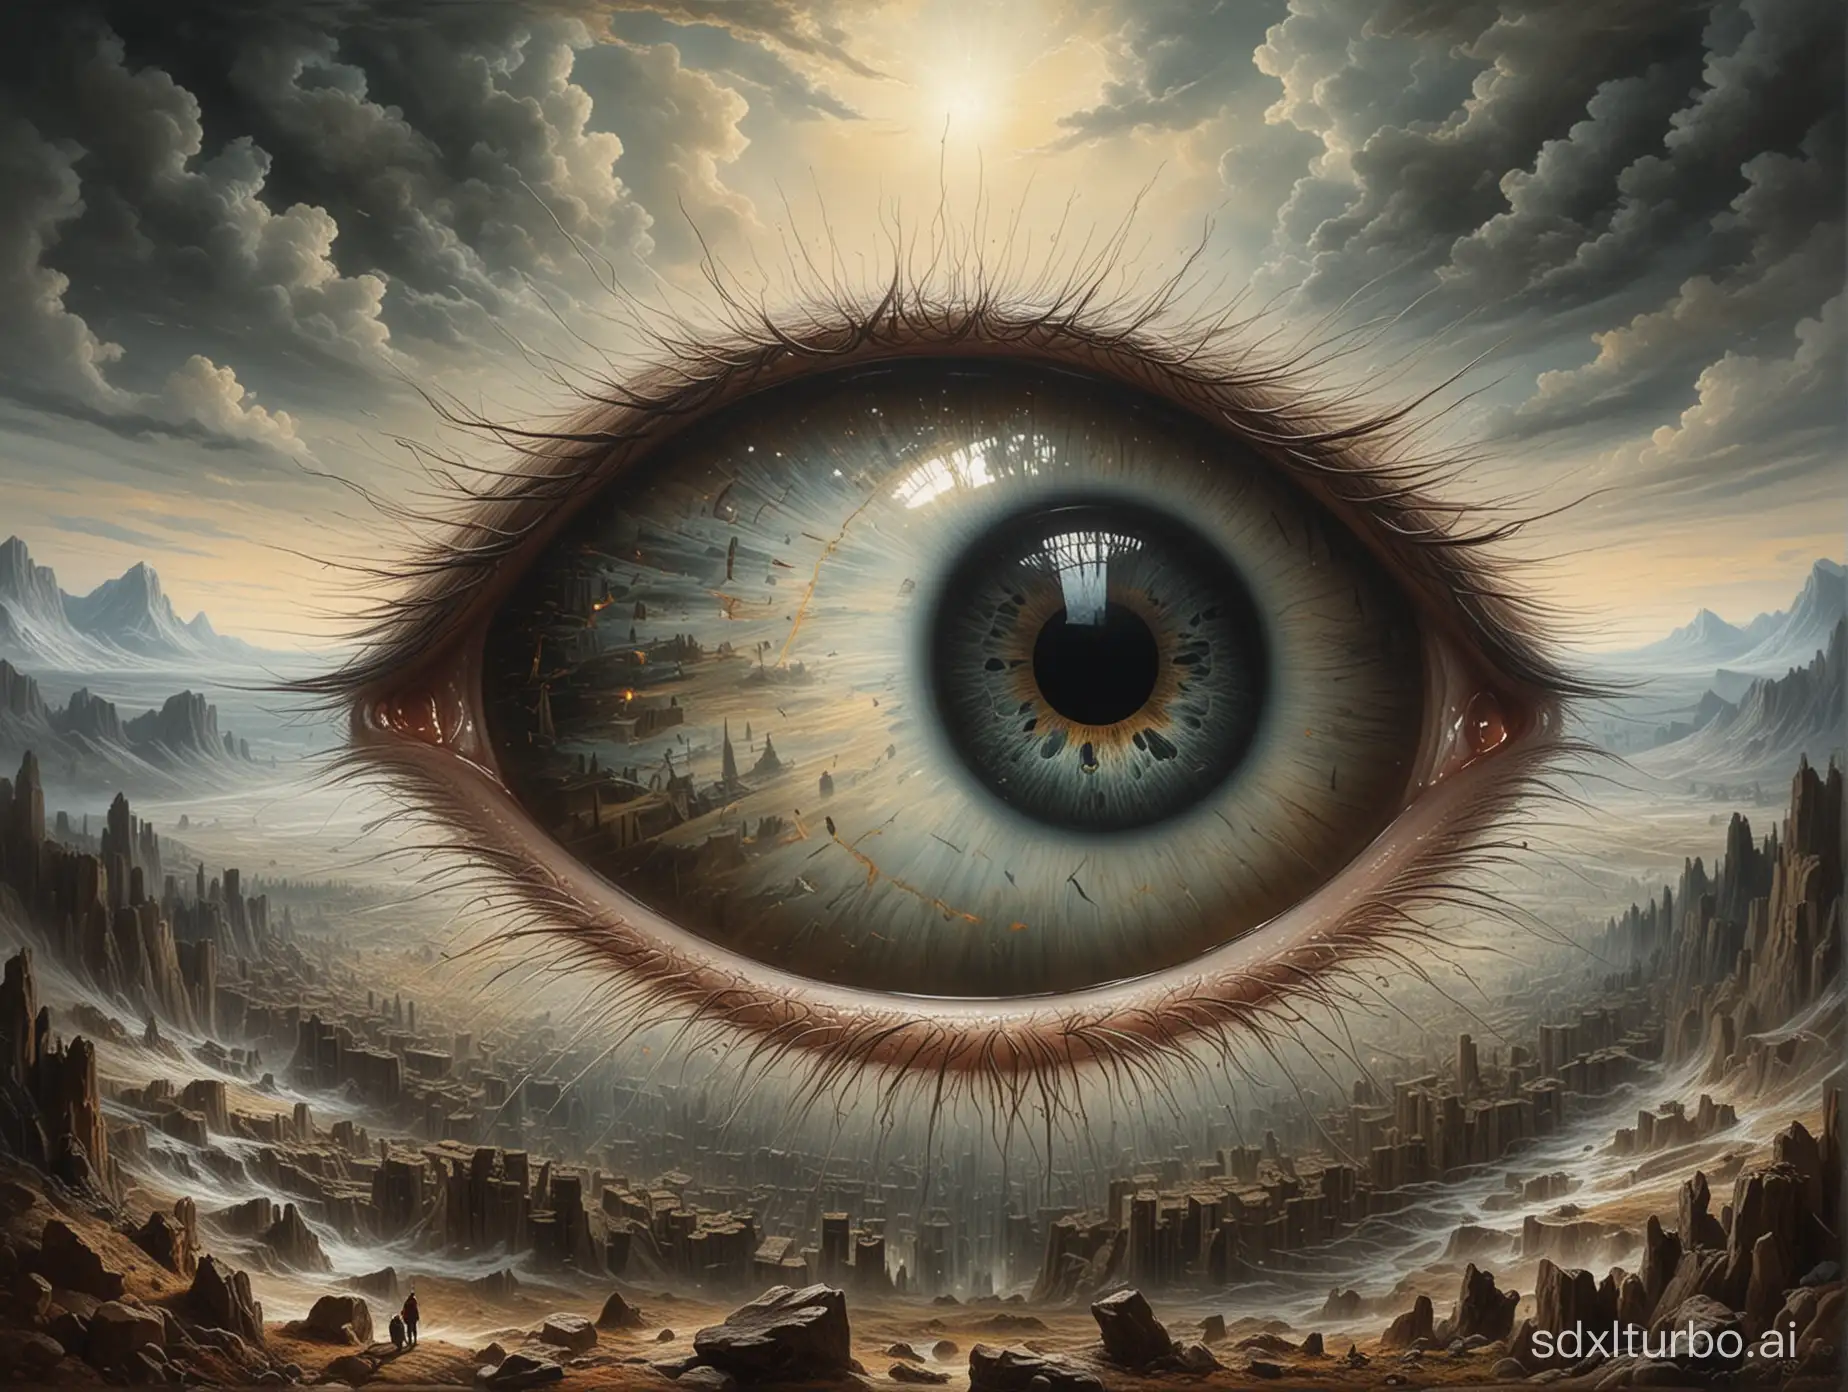 In the center of the image looms a solitary colossal eye, its gaze penetrating and arresting. Beholden to its enormity, the viewer is drawn into a realm where perception and reality converge, evoking a sense of awe and intrigue.